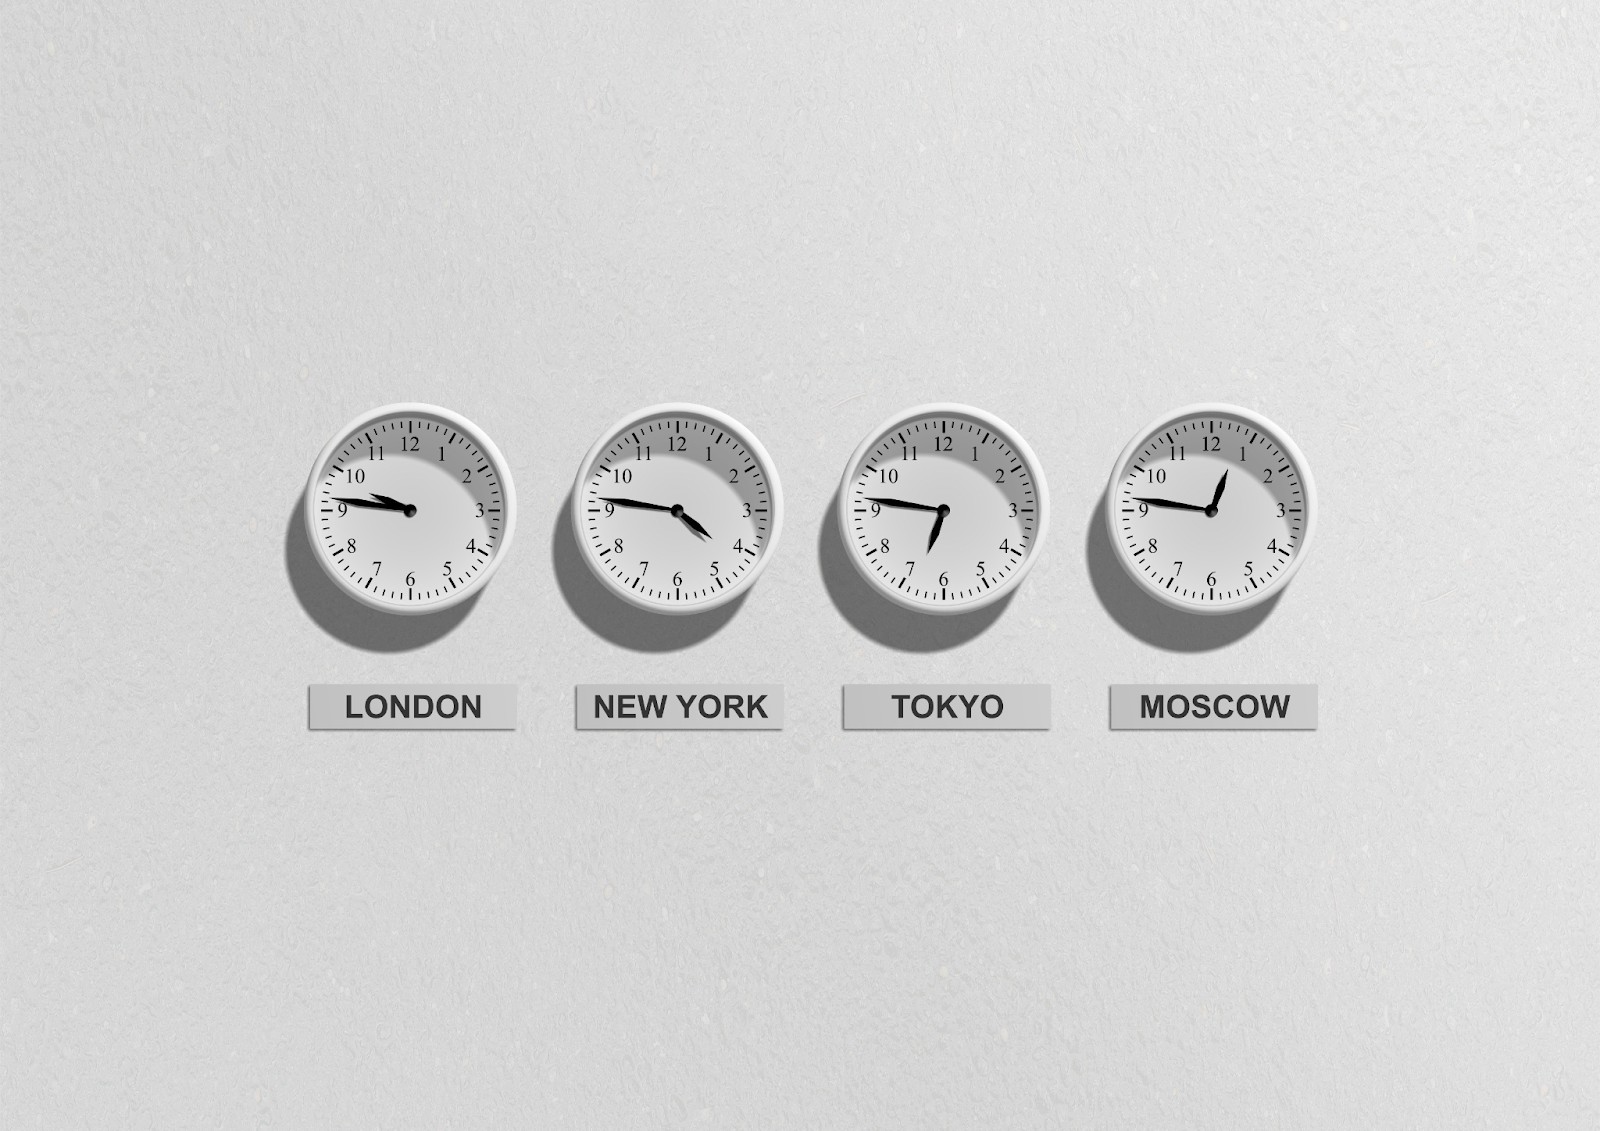 4 clocks showing different time zones